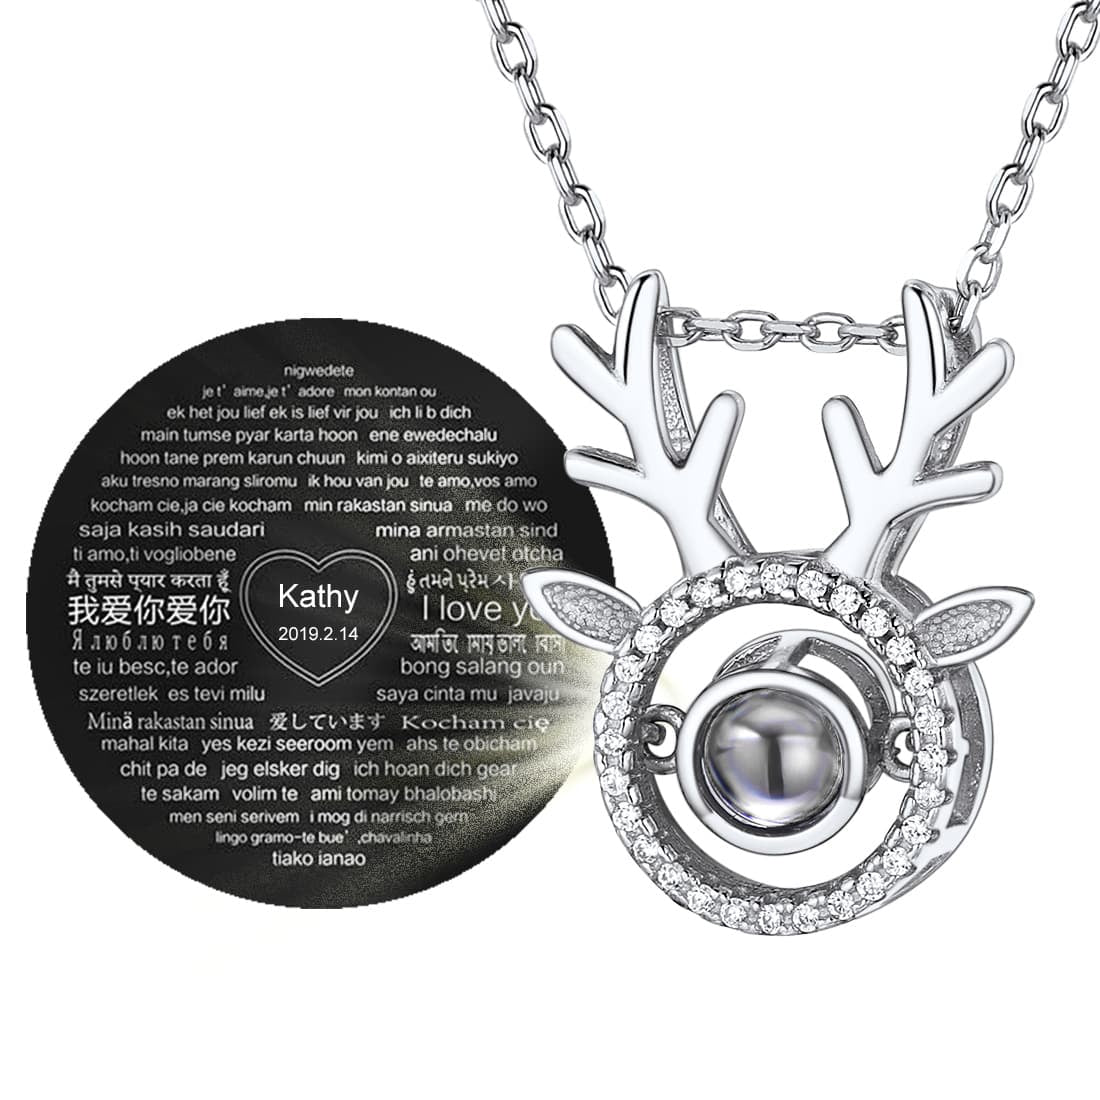 Sterling Silver Personalized Antler Photo Projection Necklace